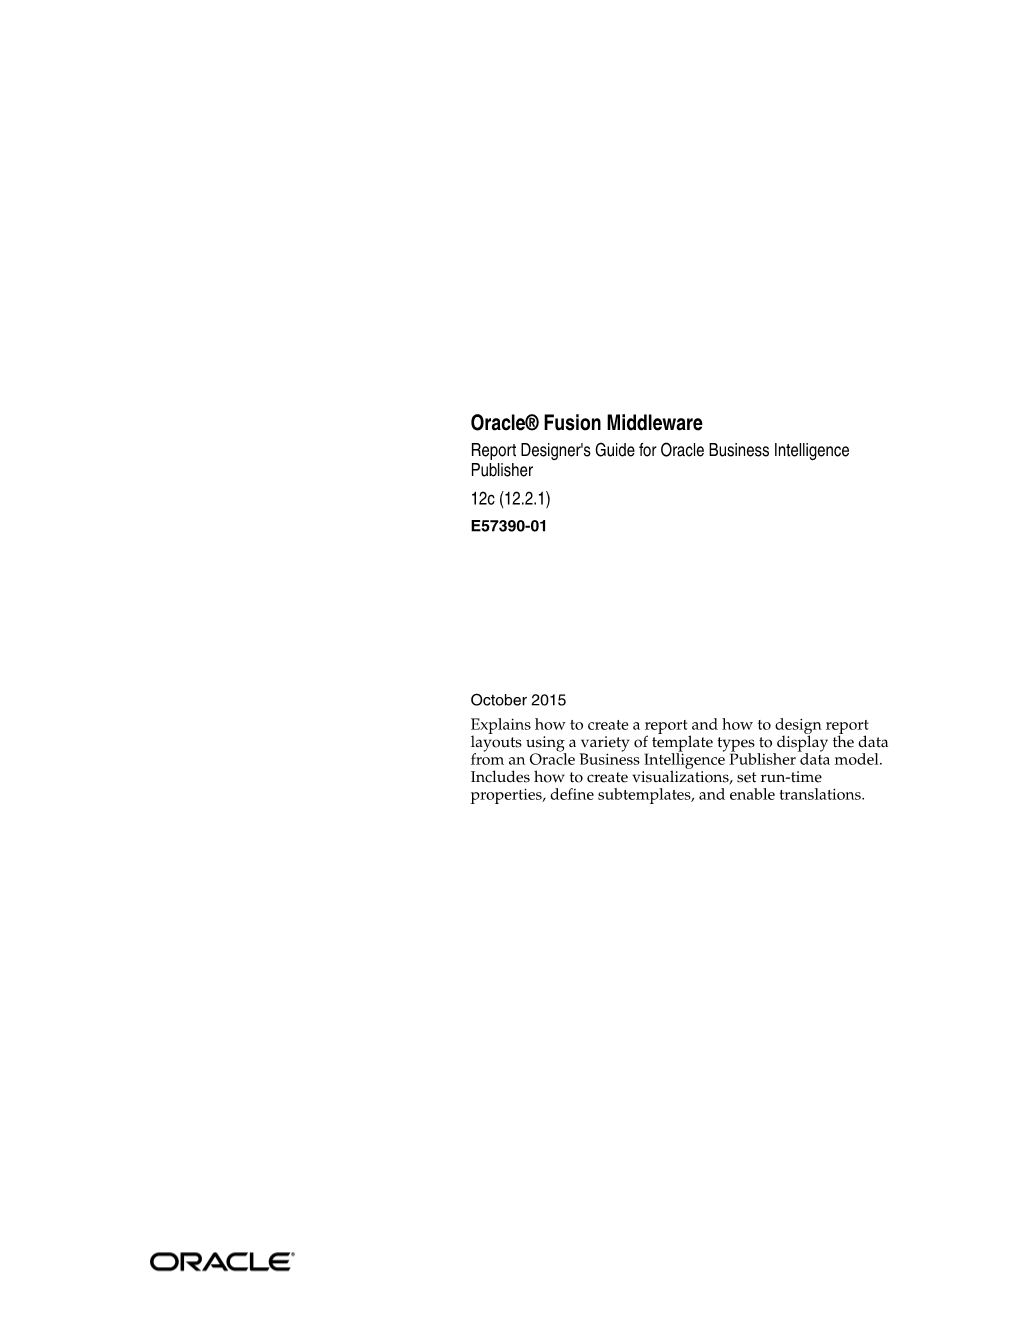 Oracle Fusion Middleware Report Designer's Guide for Oracle Business Intelligence Publisher, 12C (12.2.1) E57390-01